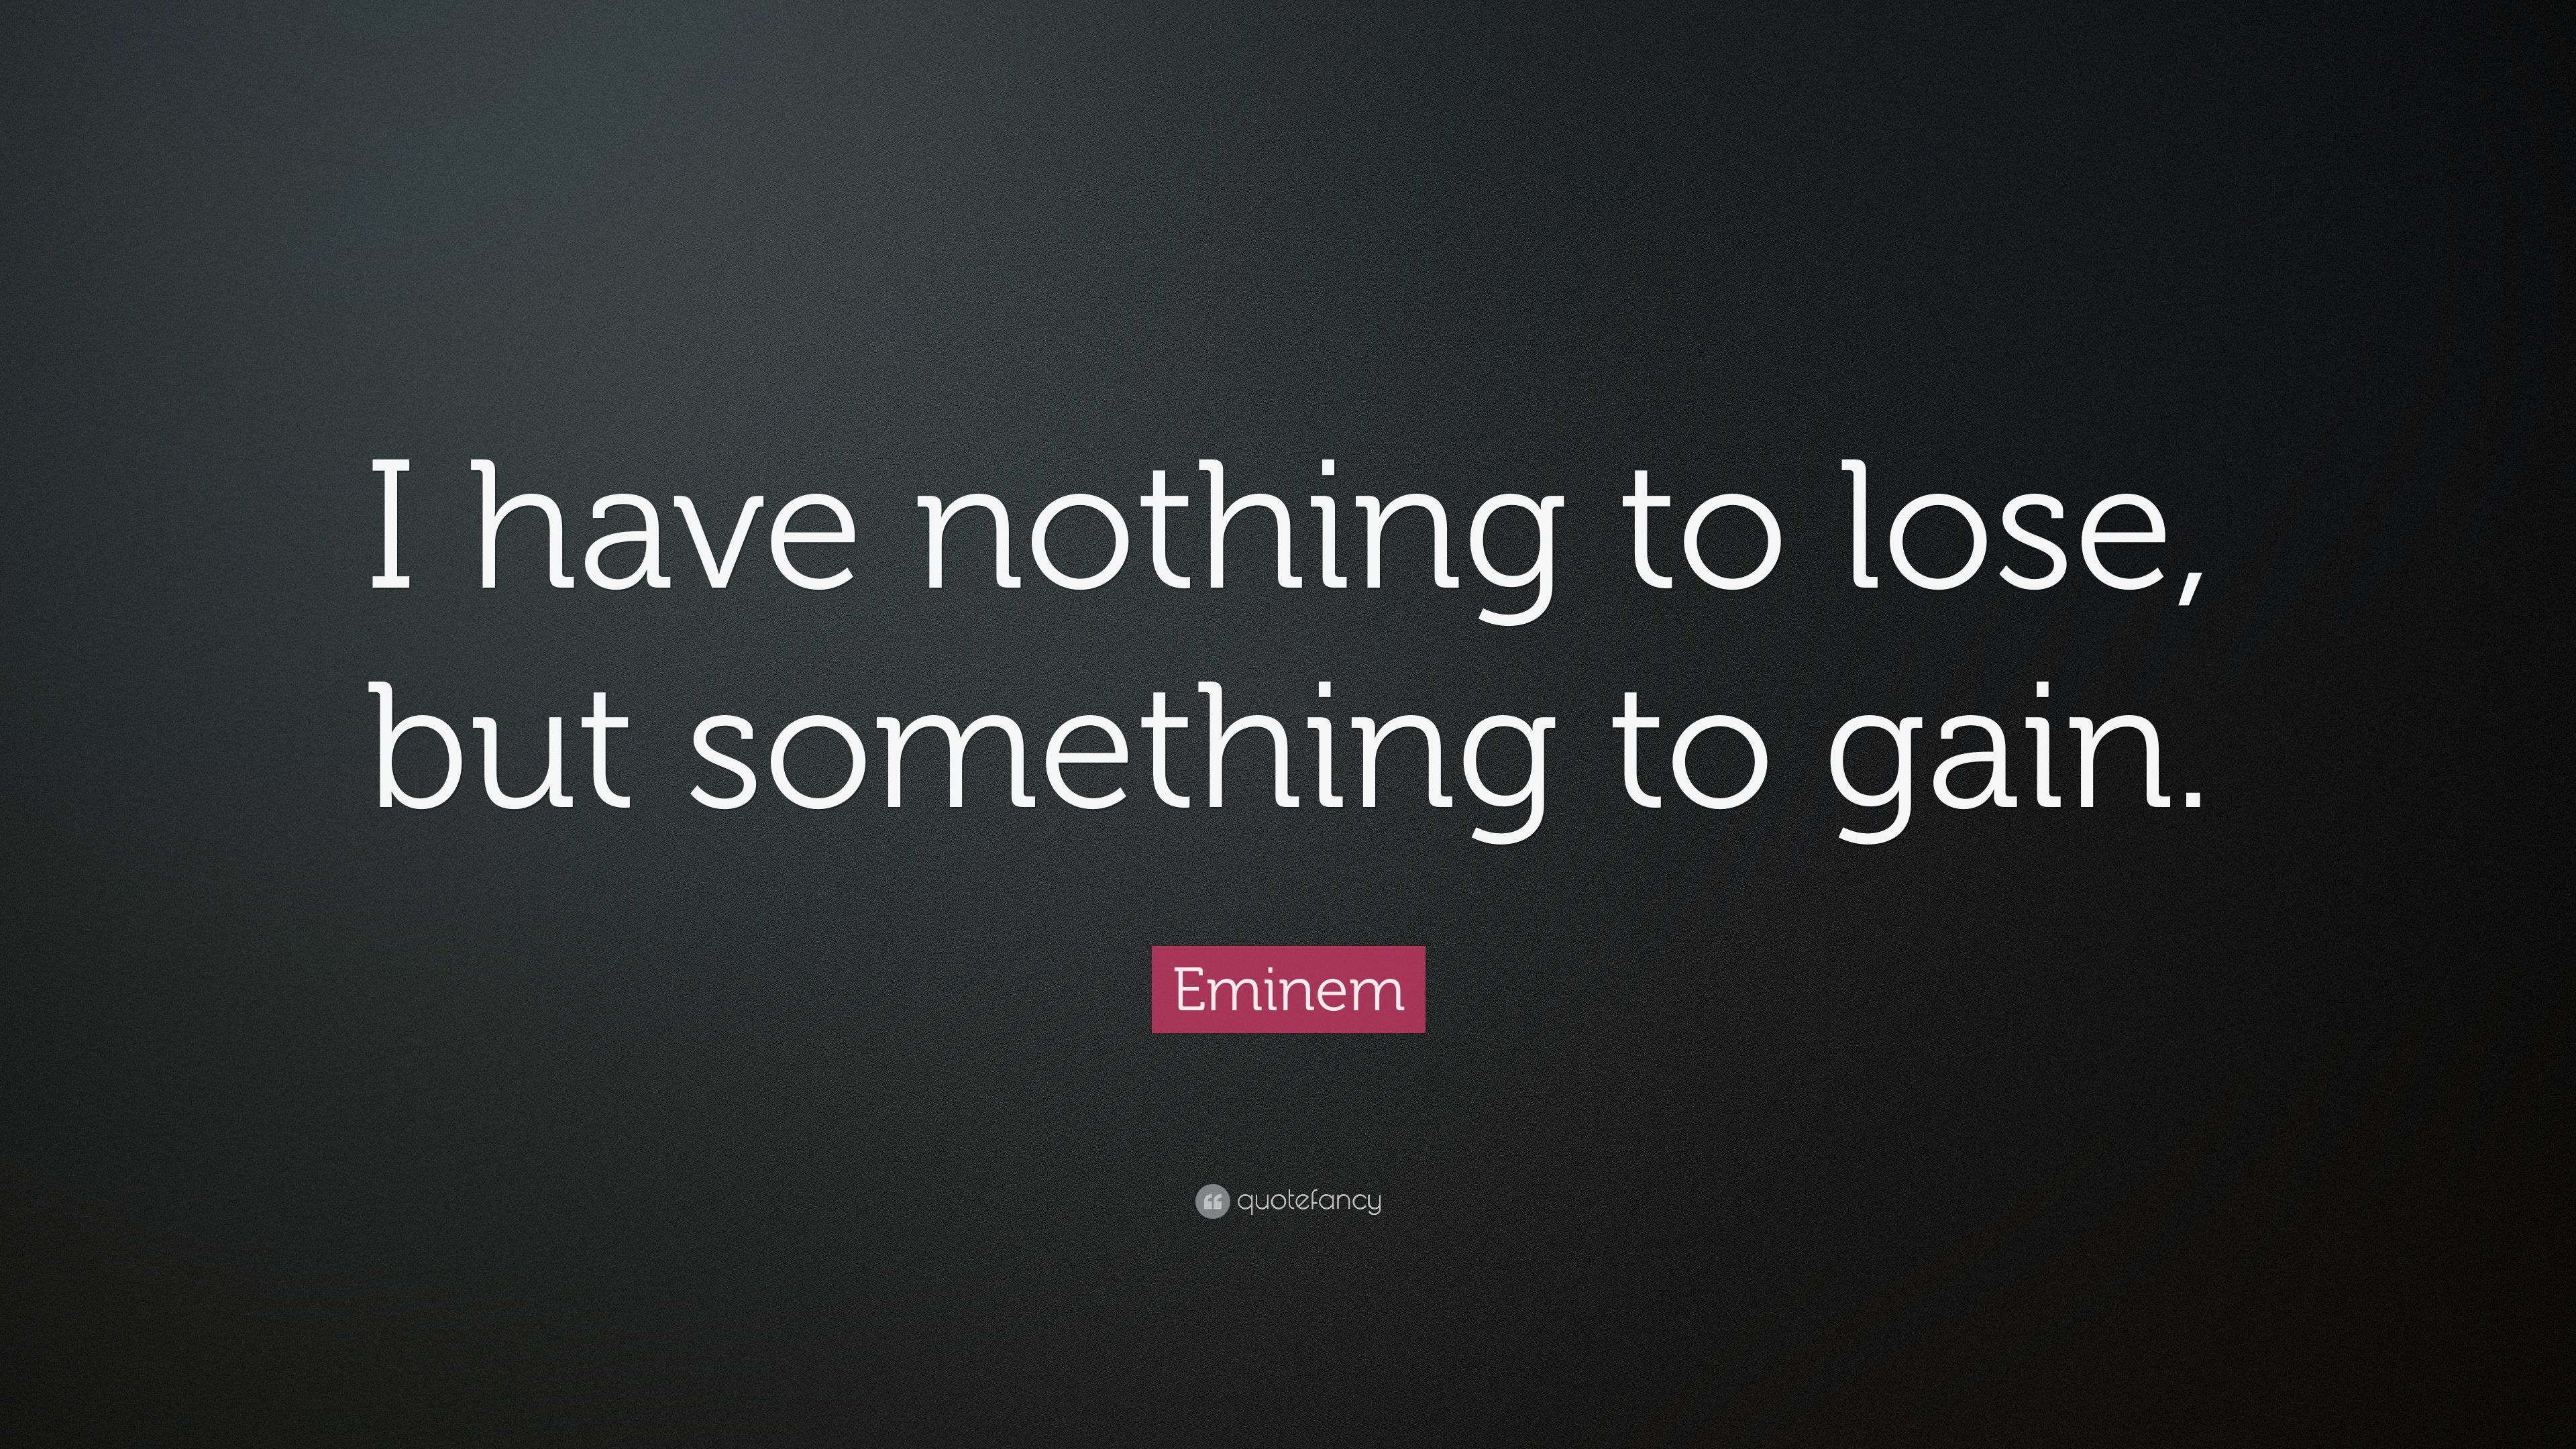 Eminem Quote: “I have nothing to lose, but something to gain.” 9